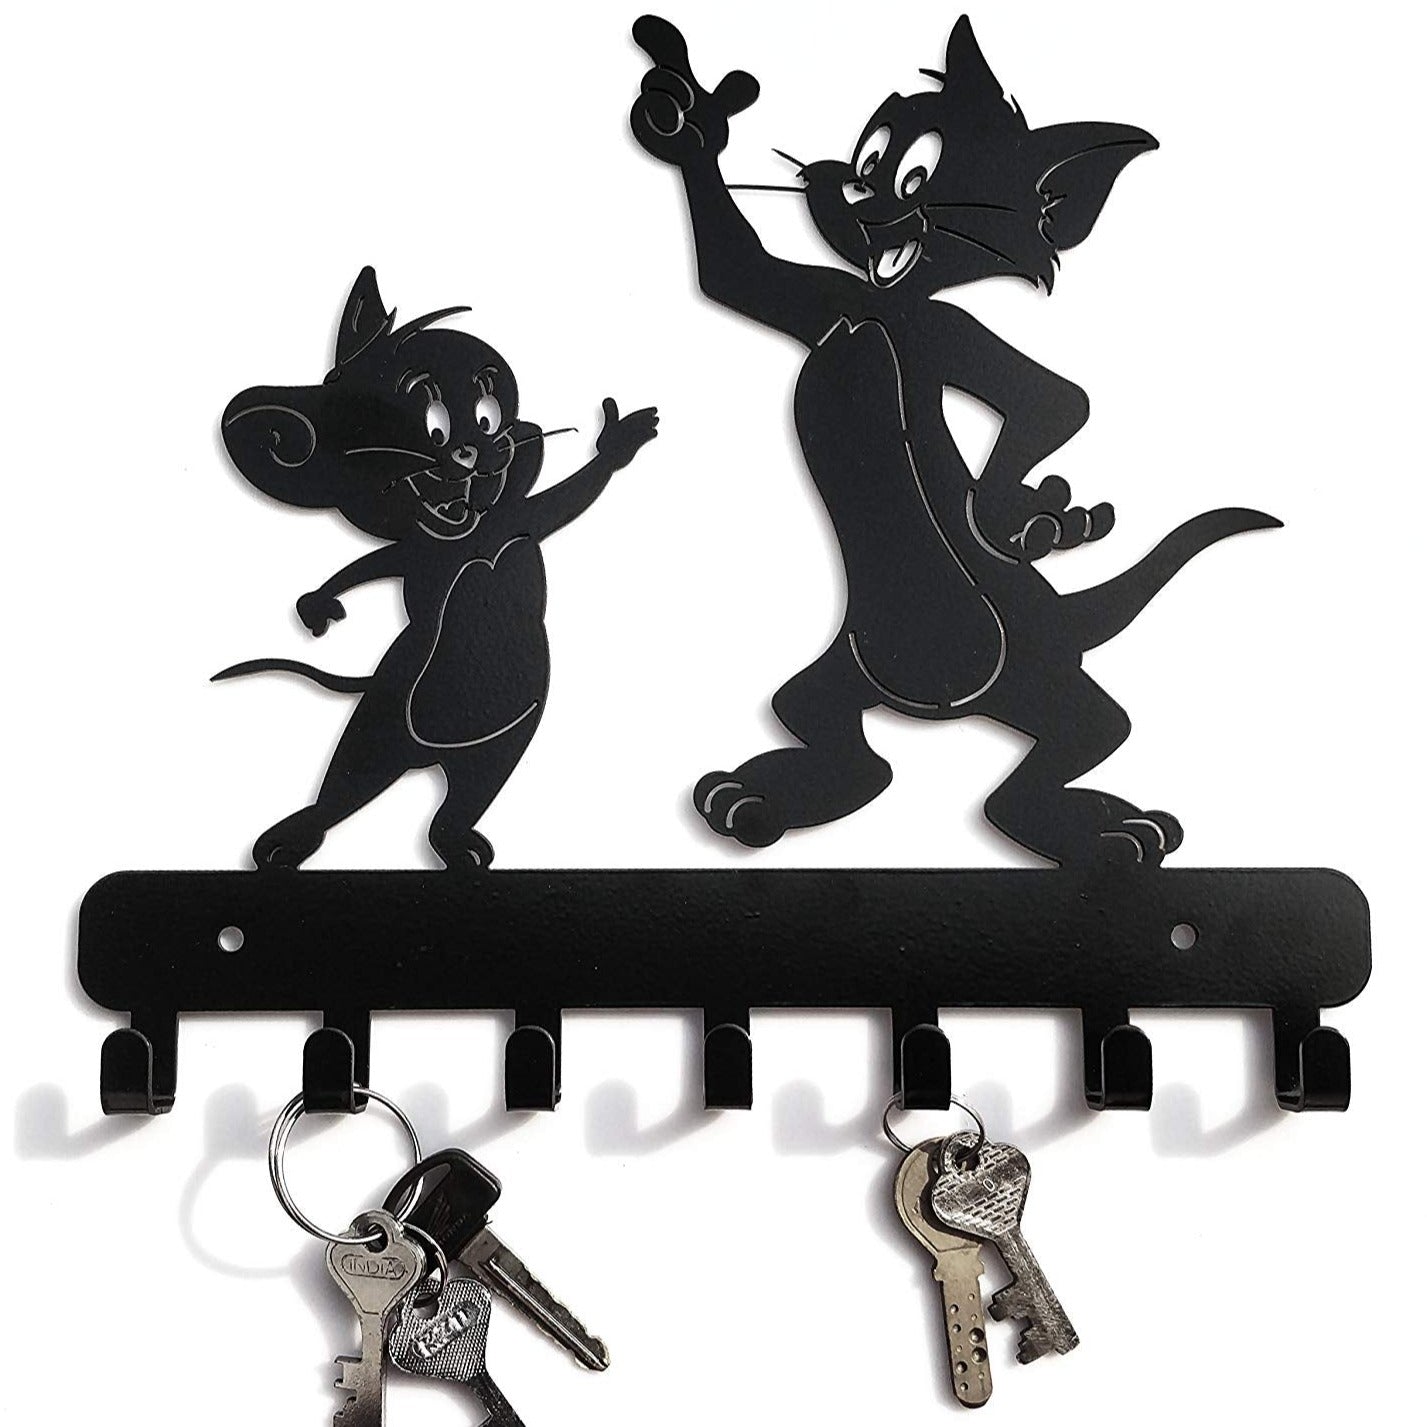 Tom and Jerry - Key Holder